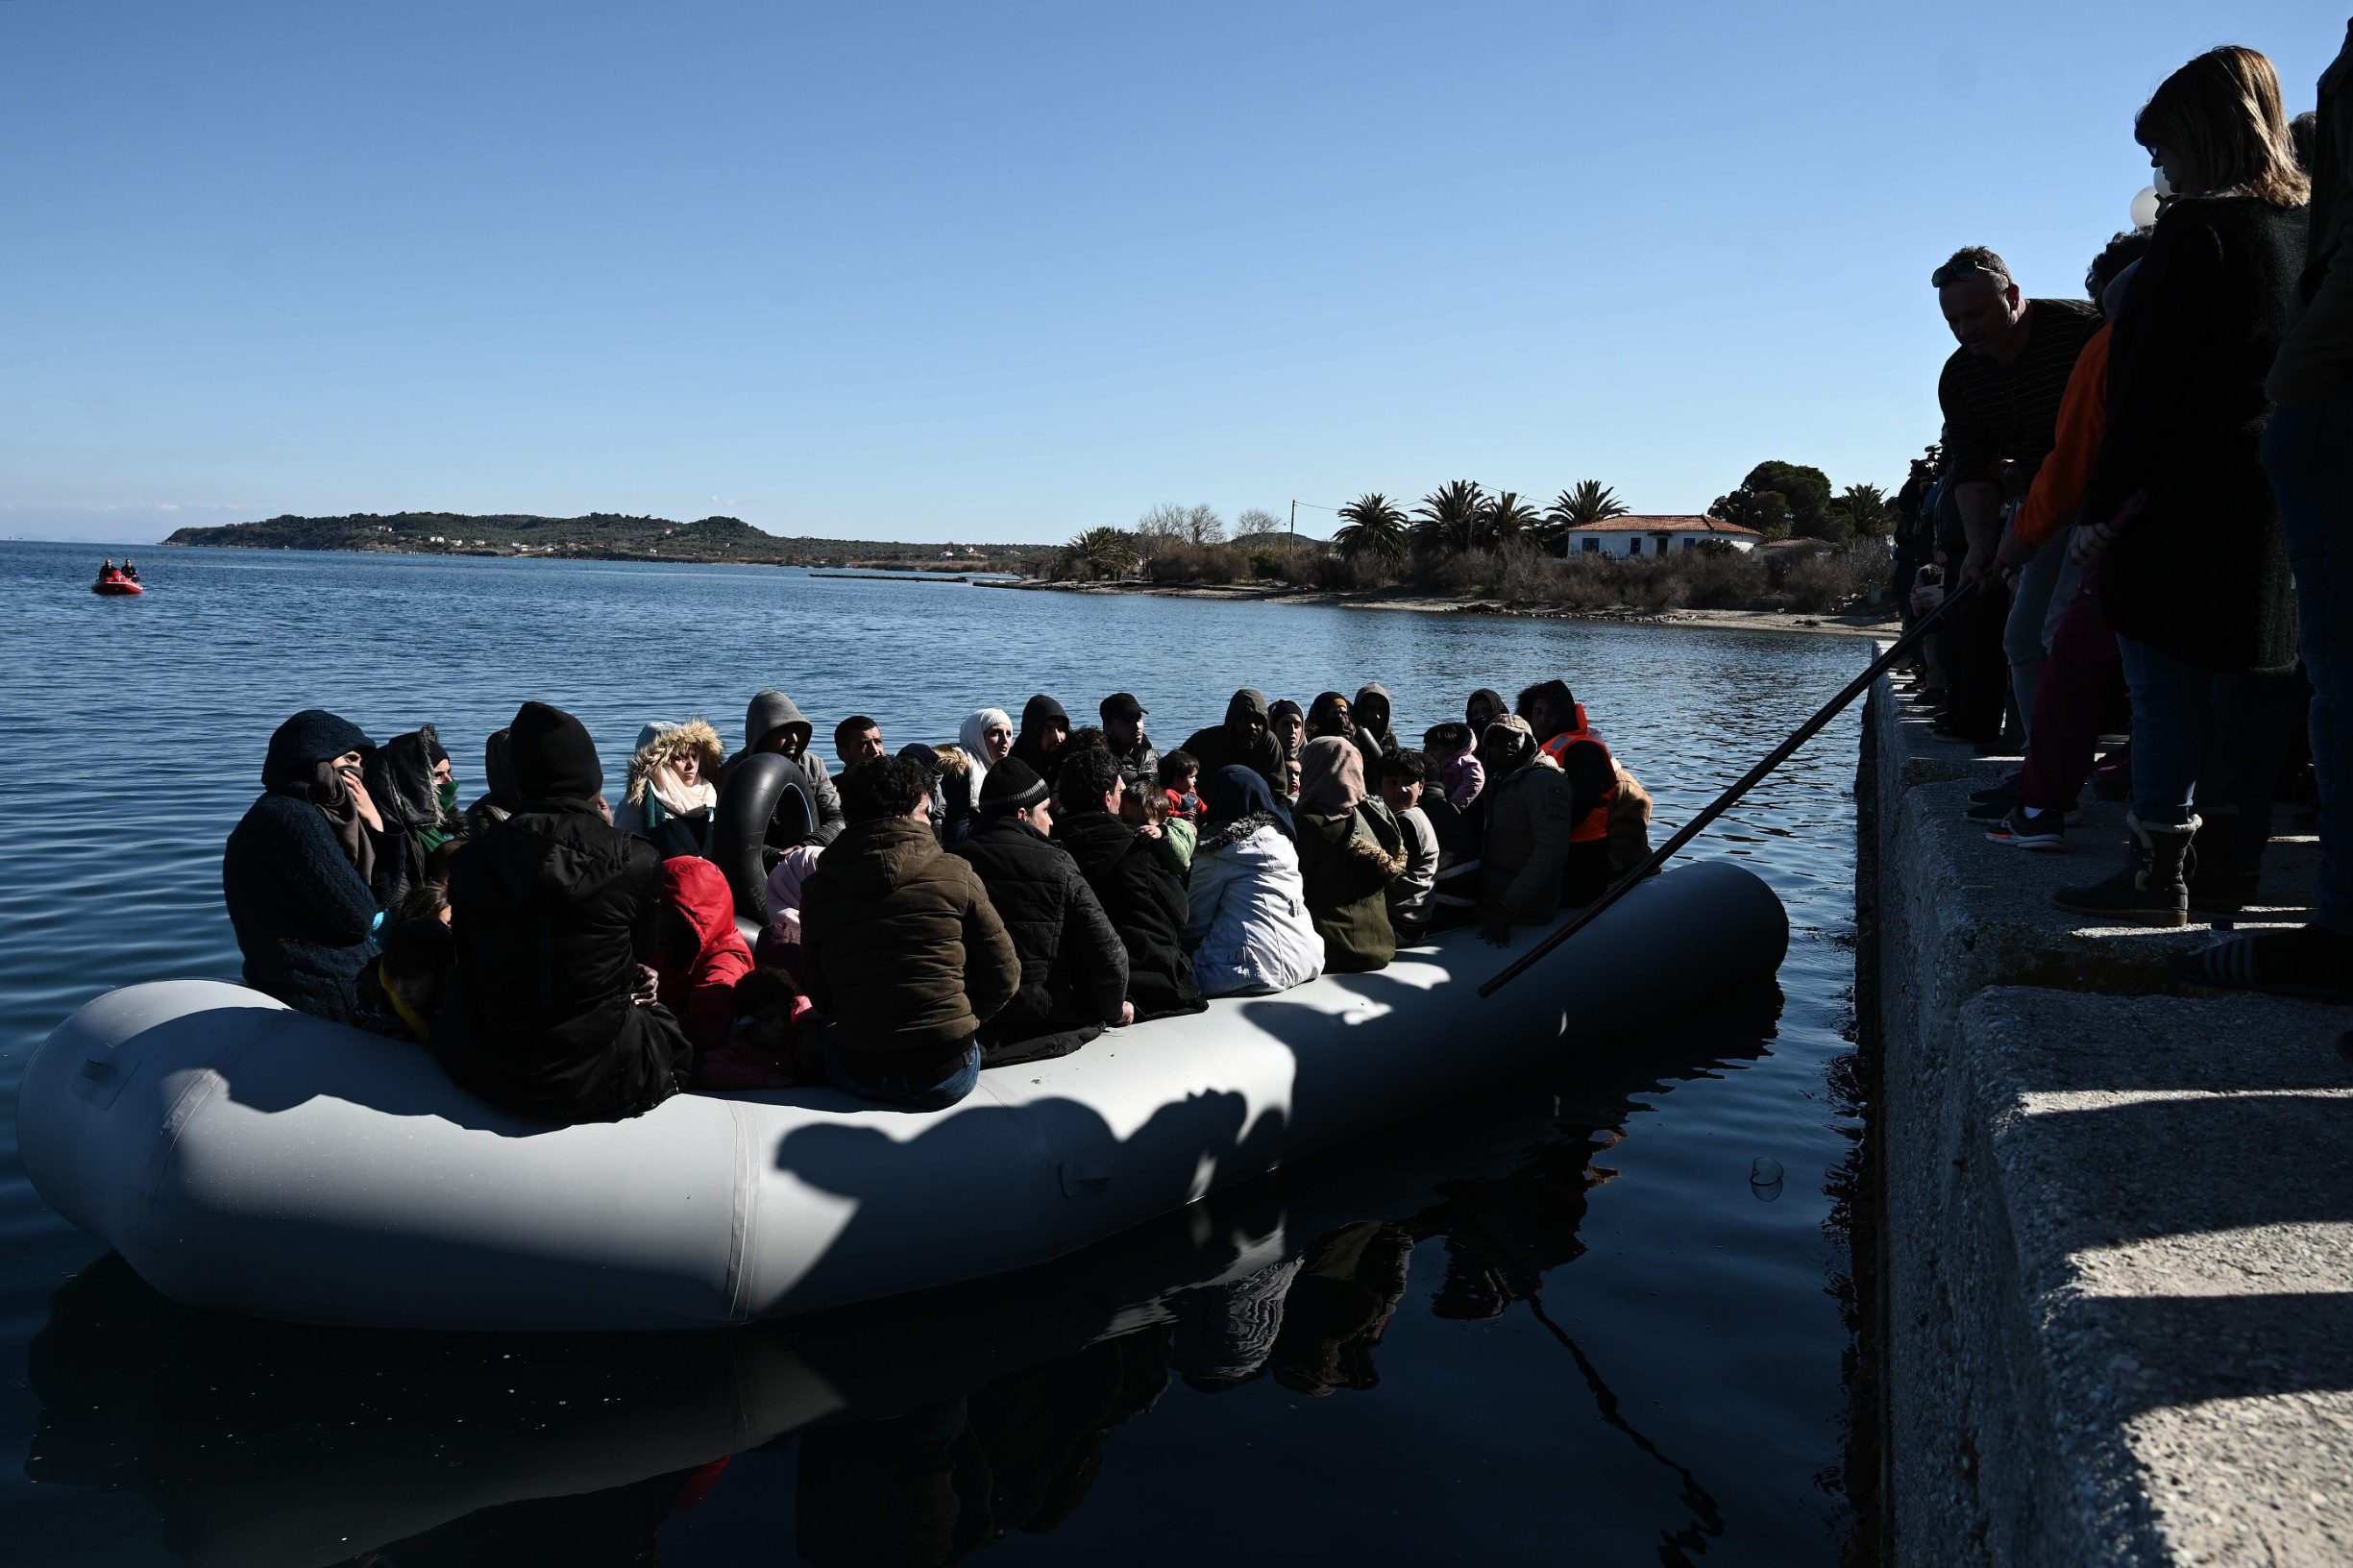 Migrants are seen on an inflatable boat as local residents prevent them from disembarking in Lesbos island, on March 1, 2020. - Greece said Sunday it has blocked nearly 10,000 migrants at its border with Turkey, which opened its gates to Europe as tensions mount over its deepening conflict in Syria. 
Migrant numbers have swelled along the rugged frontier after Turkey's president Recep Tayyip Erdogan said it 